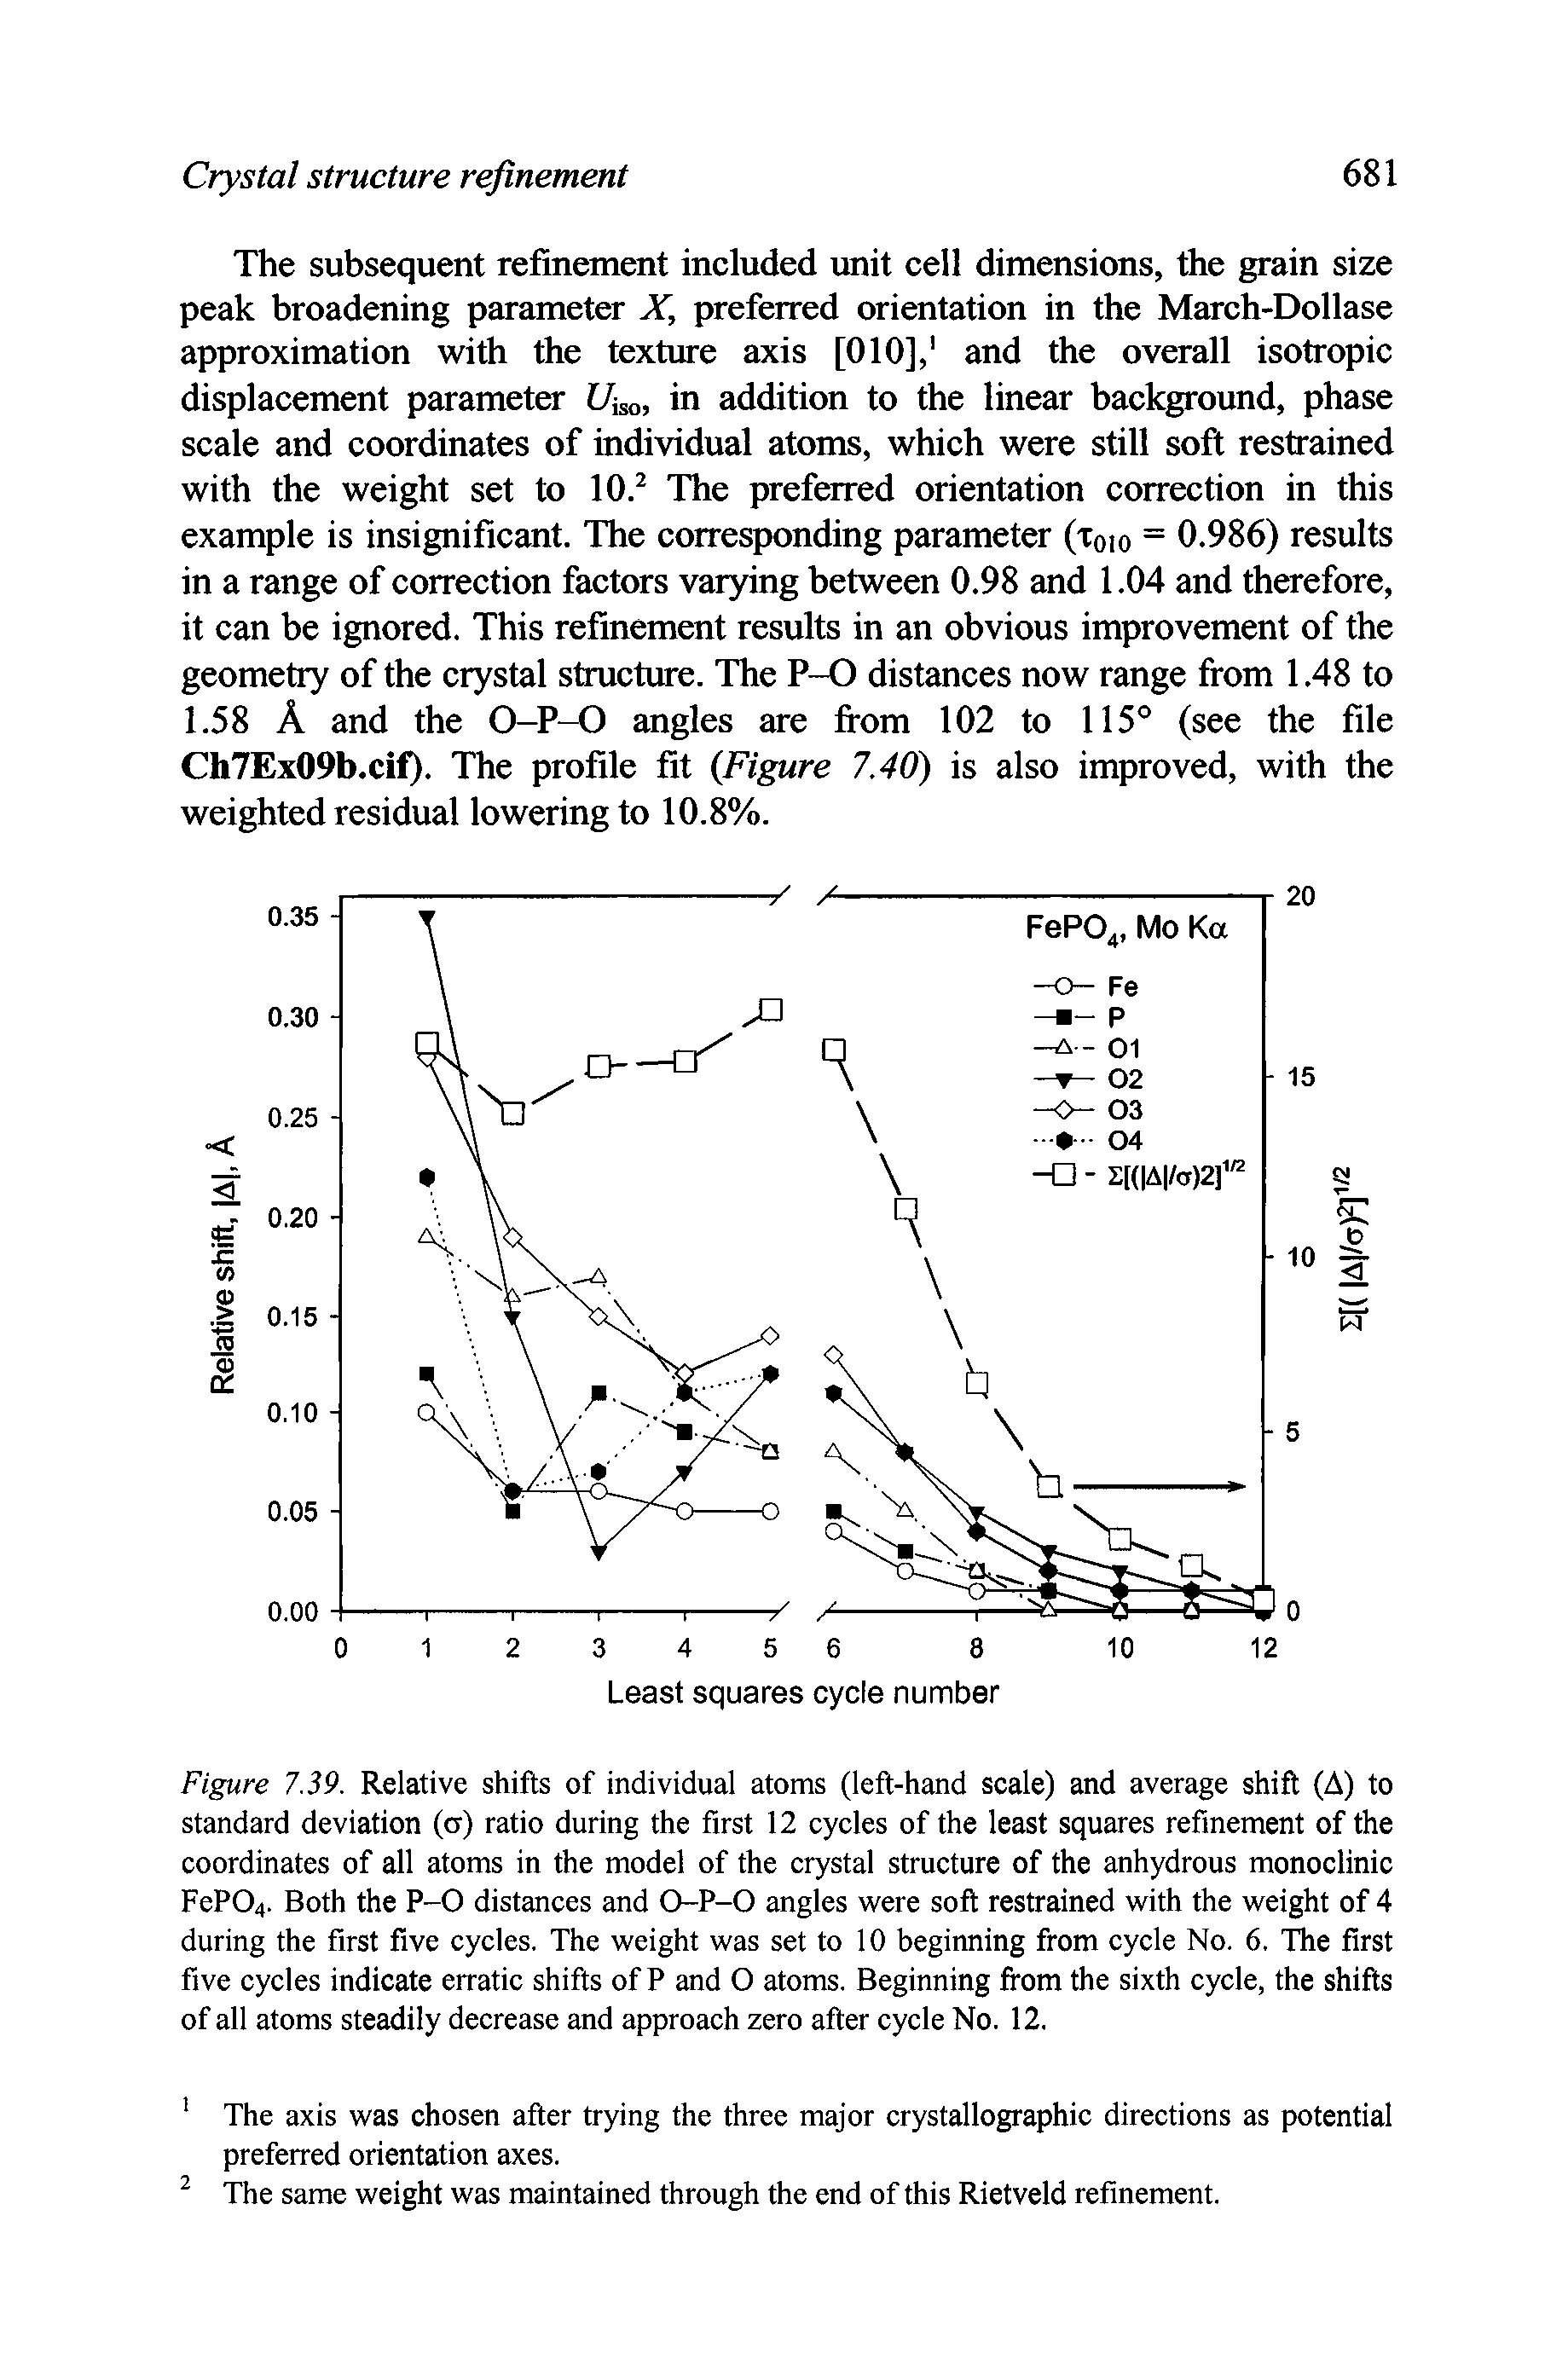 Figure 7.39. Relative shifts of individual atoms (left-hand scale) and average shift (A) to standard deviation (cr) ratio during the first 12 cycles of the least squares refinement of the coordinates of all atoms in the model of the crystal structure of the anhydrous monoclinic FeP04. Both the P-0 distances and O-P-0 angles were soft restrained with the weight of 4 during the first five cycles. The weight was set to 10 beginning from cycle No. 6. The first five cycles indicate erratic shifts of P and O atoms. Beginning from the sixth cycle, the shifts of all atoms steadily decrease and approach zero after cycle No. 12.